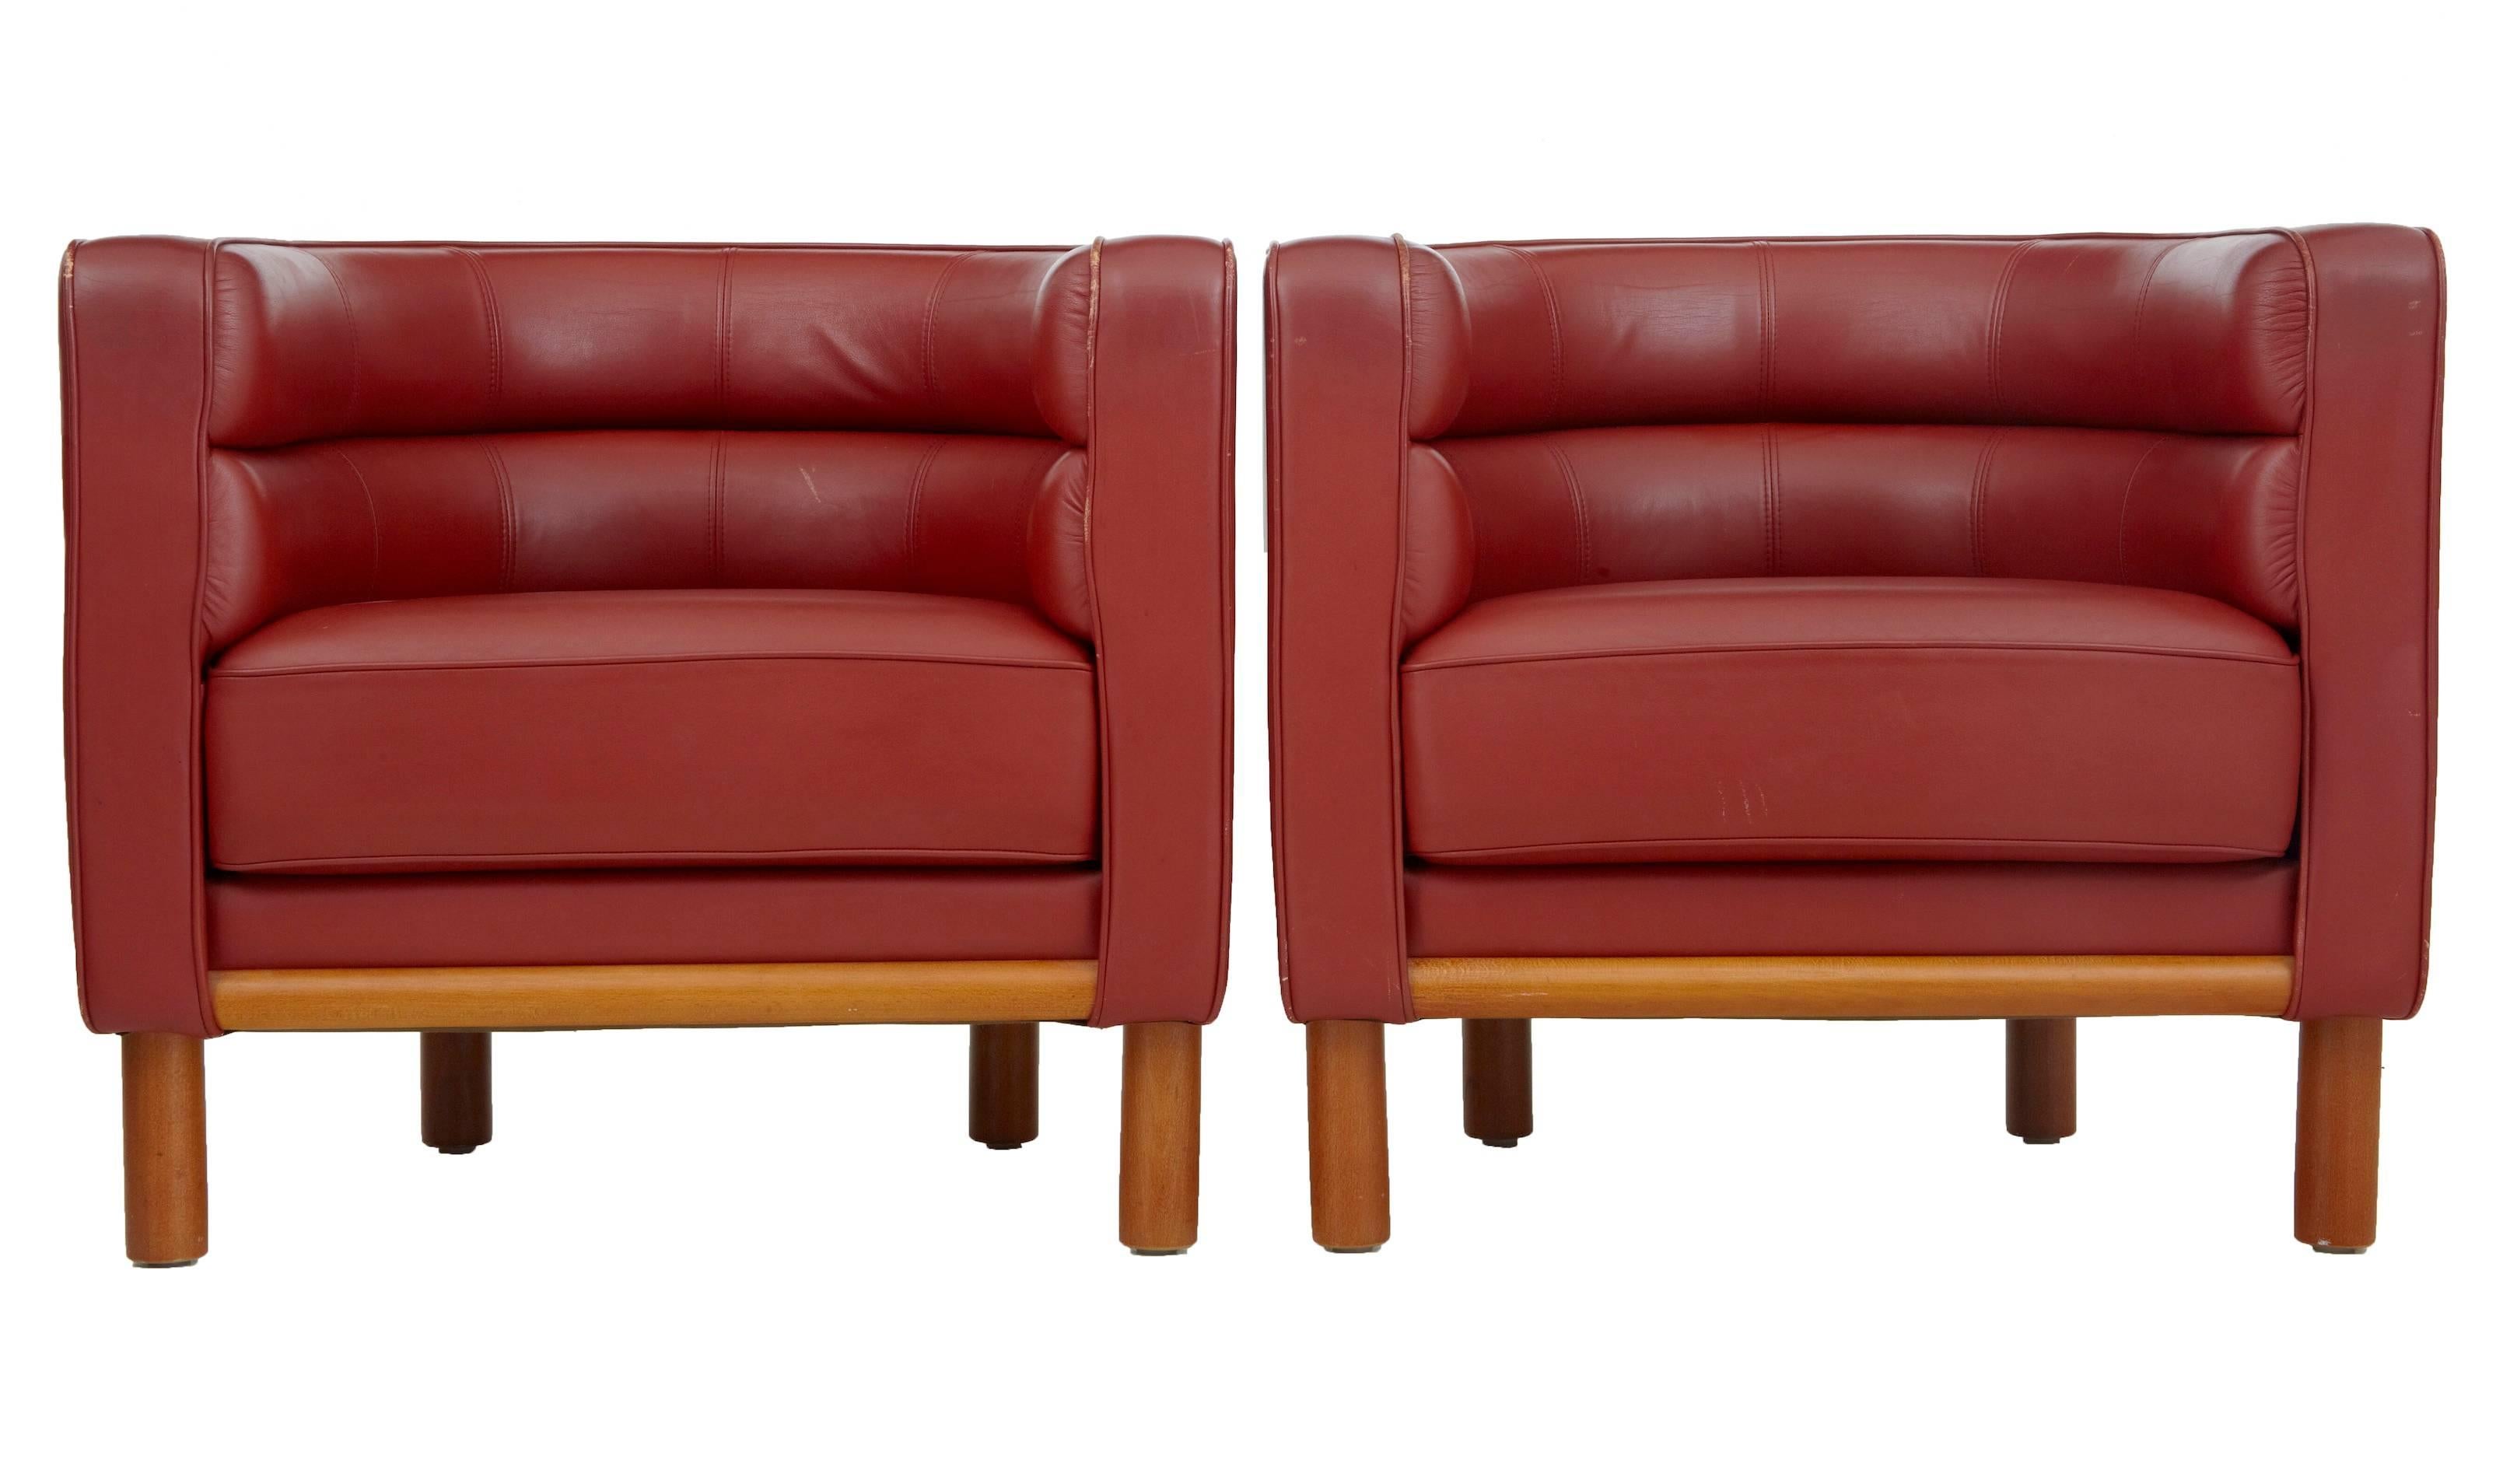 Upholstered in rusty red leather. Beech round legs and exposed front under frame. Very comfortable and stylish. Some minor wear to leather piping, odd mark to leather around the outside, minor scuff marks to wood frame we have four pairs of these